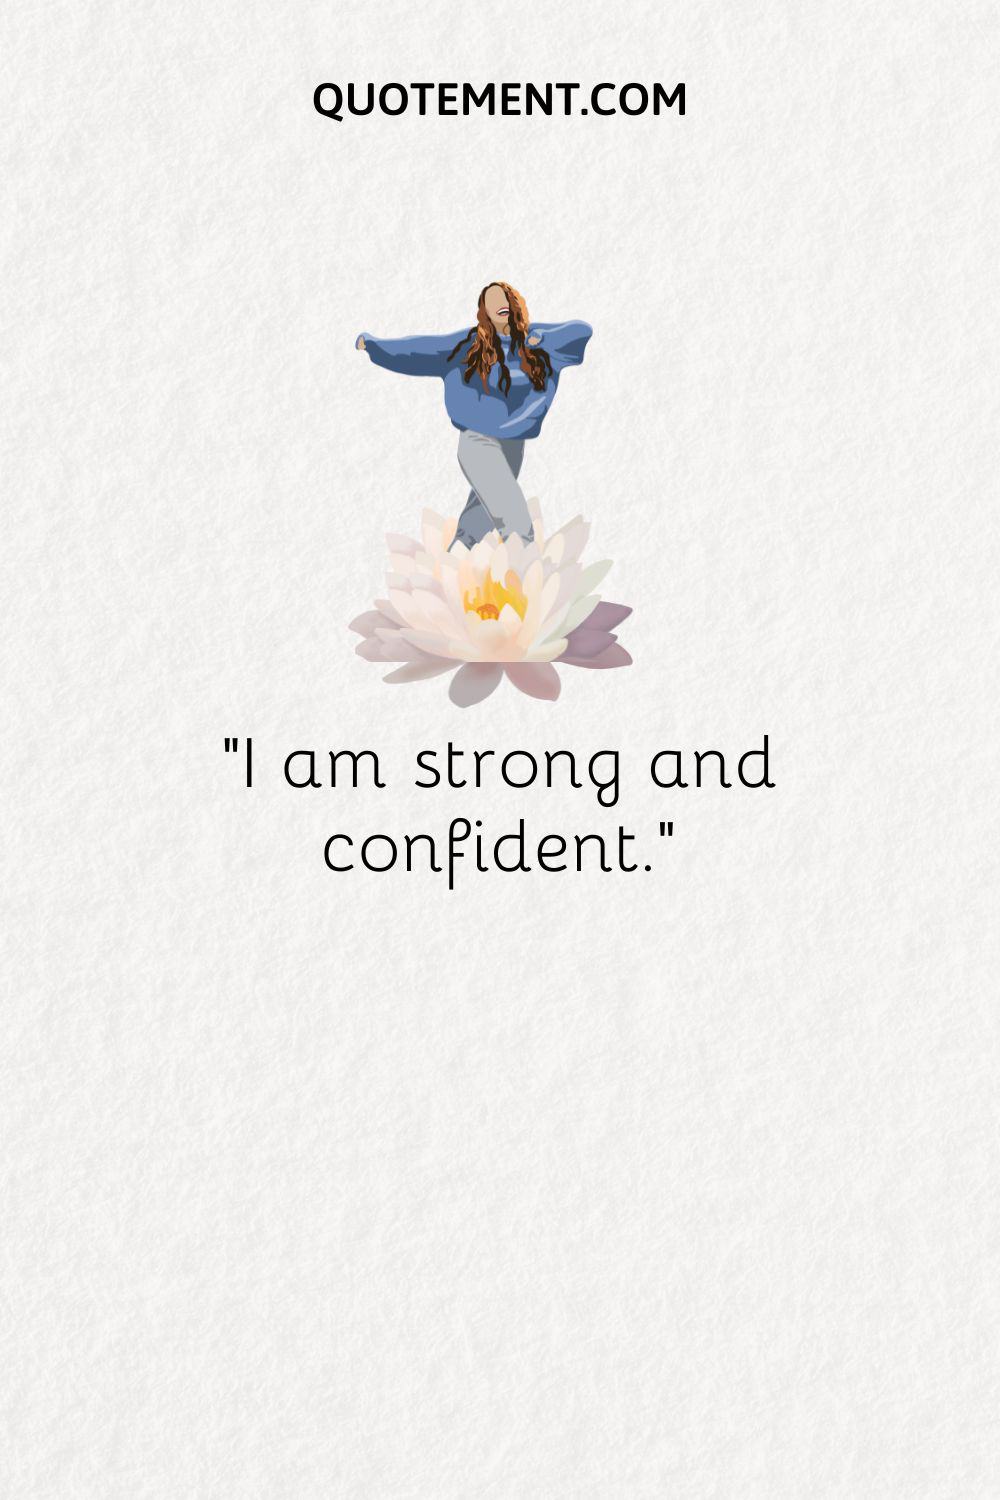 I am strong and confident